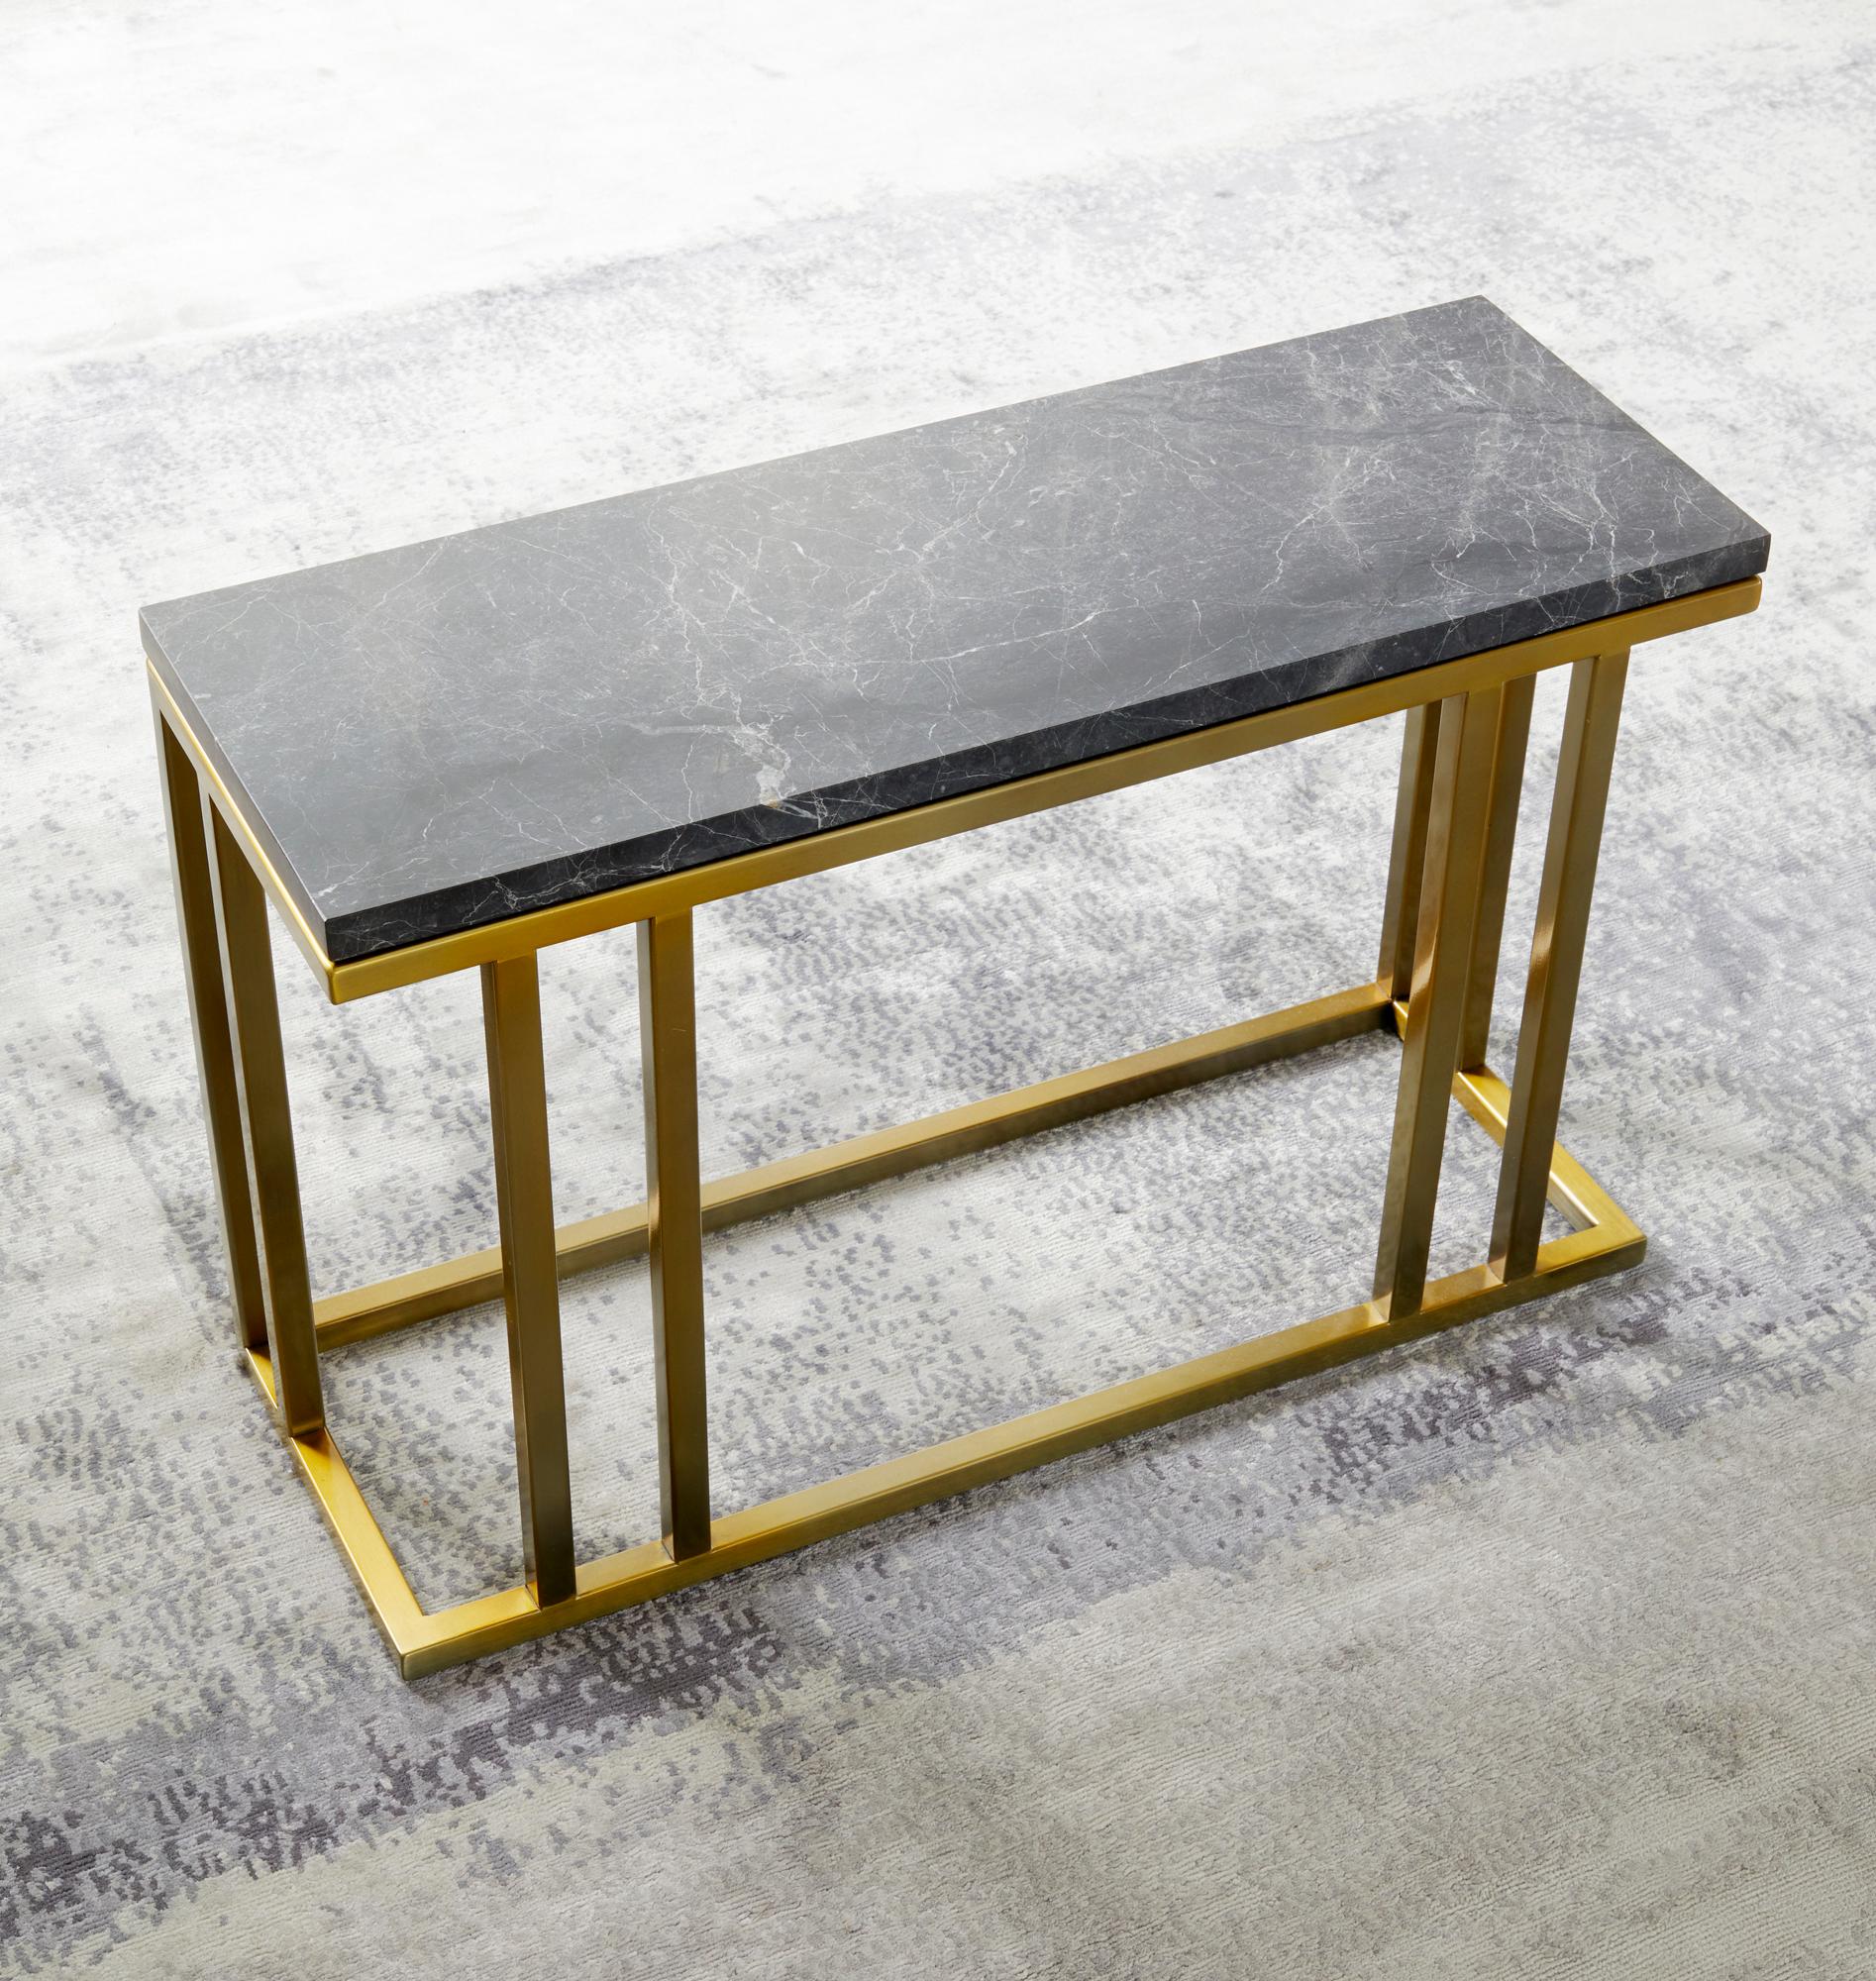 Inspired by the Greek God, Helios, the Elio collection’s signature symmetrical leg design embodies the Gods’ powerful, masculine persona. With eight, slender vertical columns, masterfully connected by the tabletop and base frame, the Elio frame has